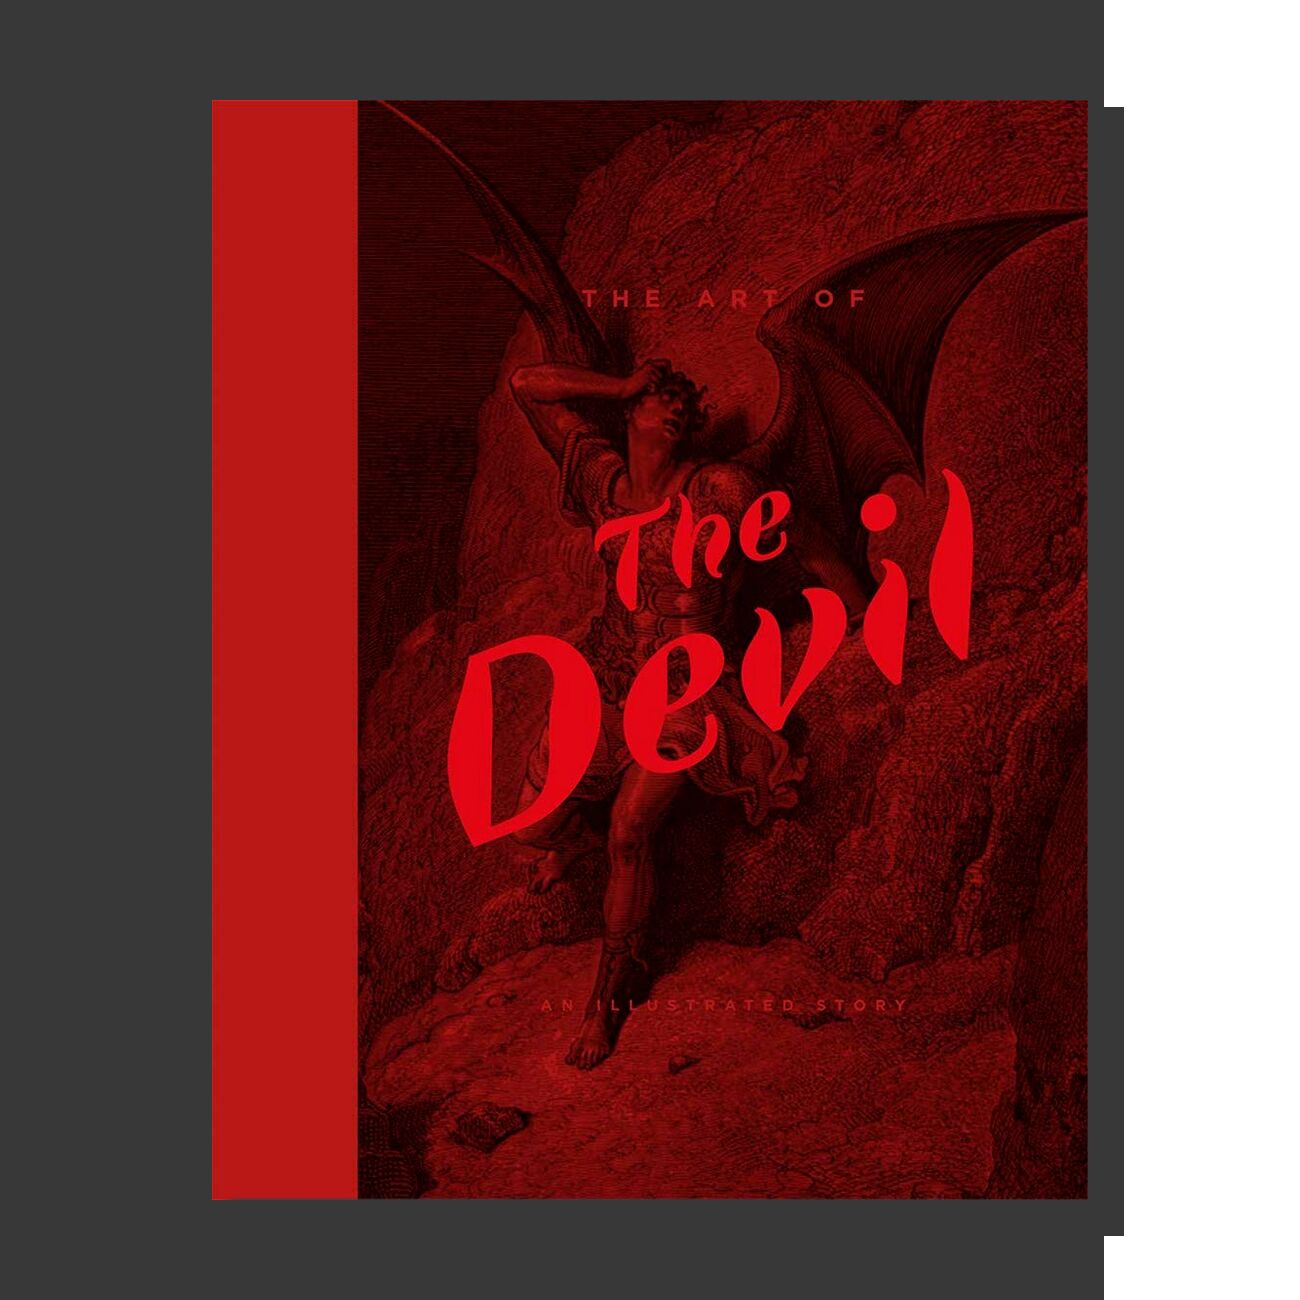 The Art of the Devil: An Illustrated History